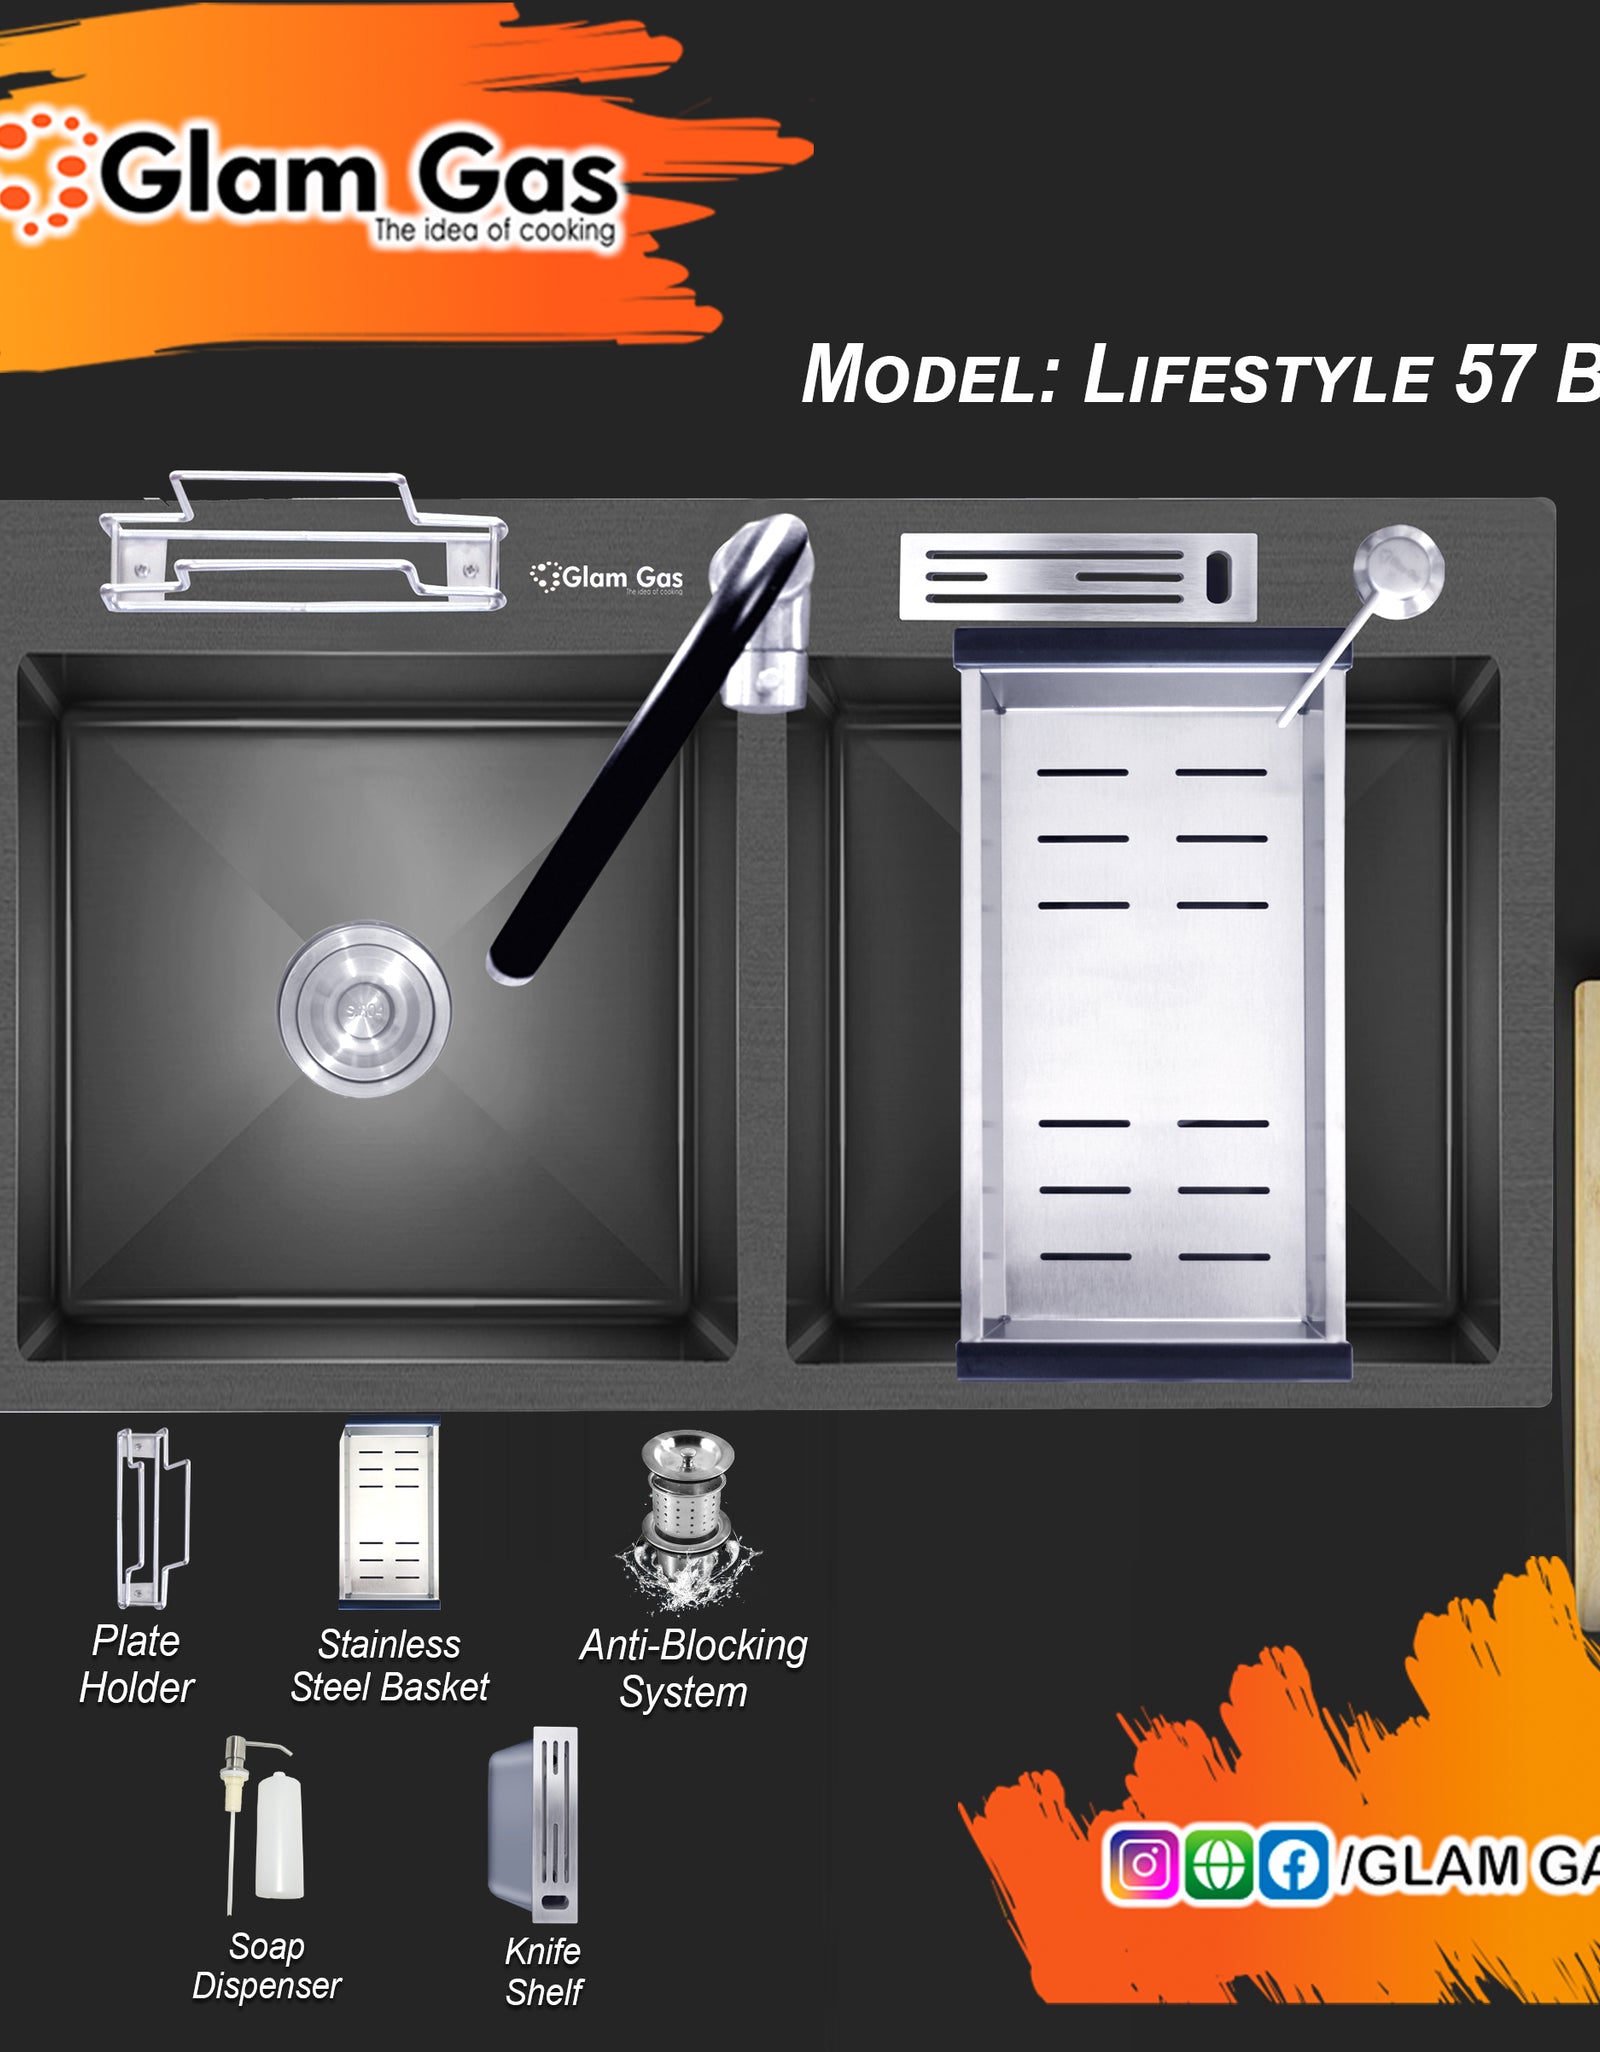 NO 1 Product in Pakistan Life Style 57 Bk|Top Built-In Sink & Fittings